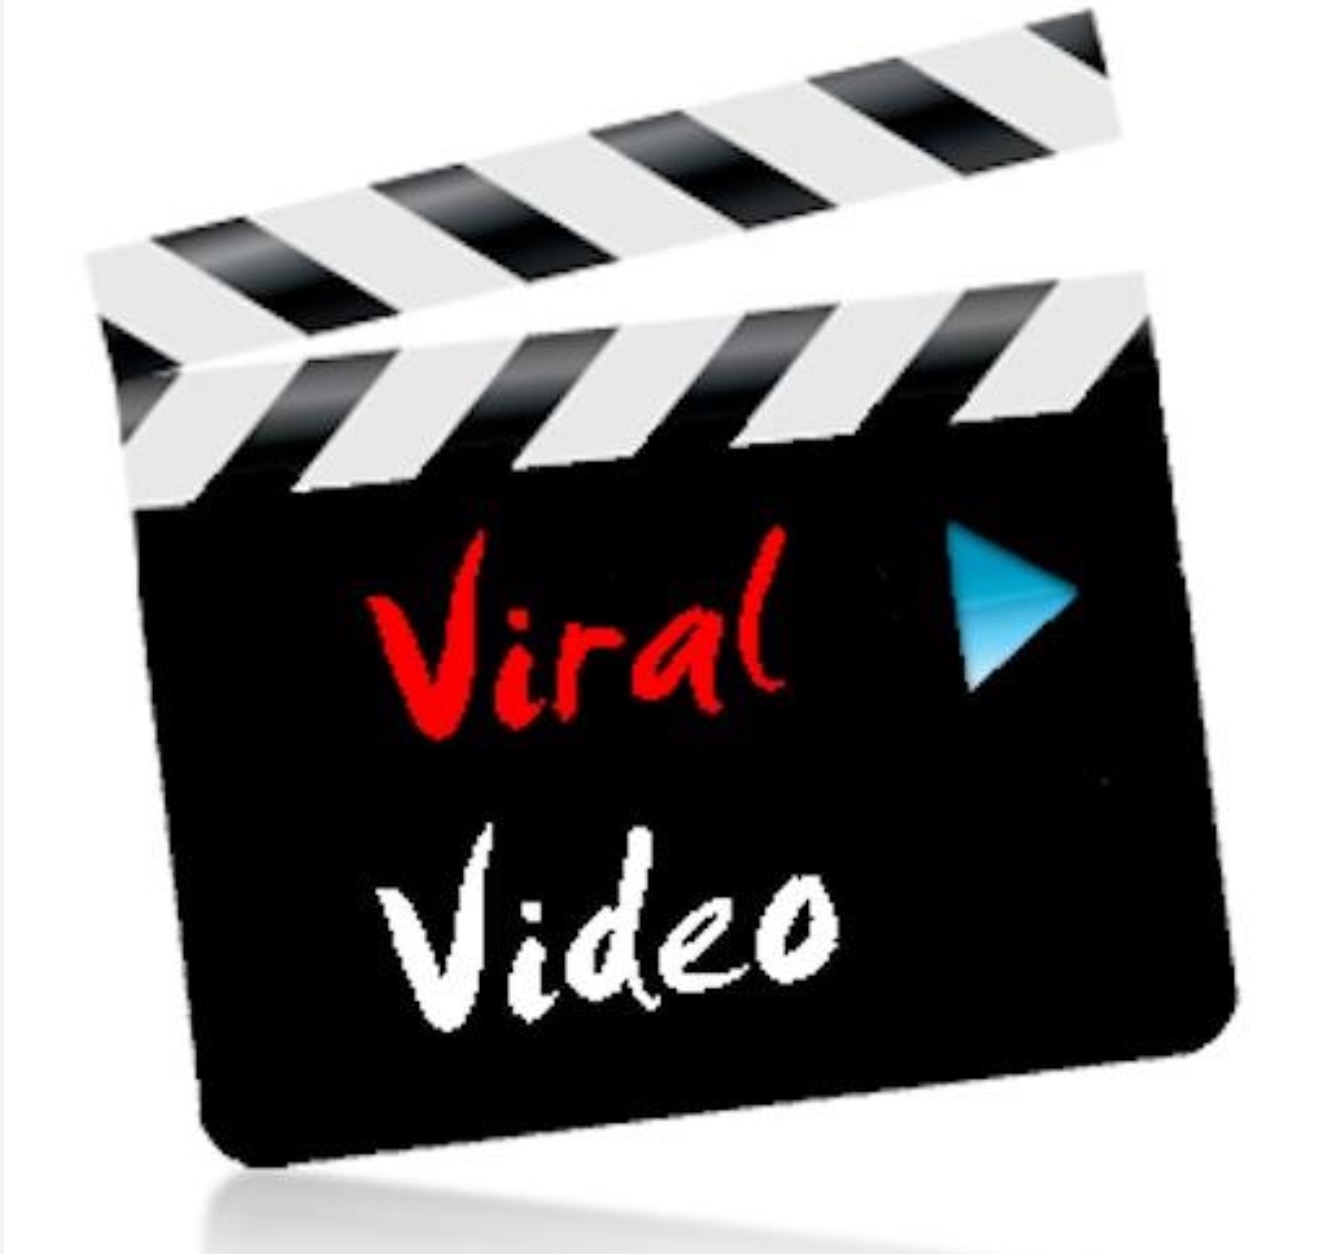 viral video featured